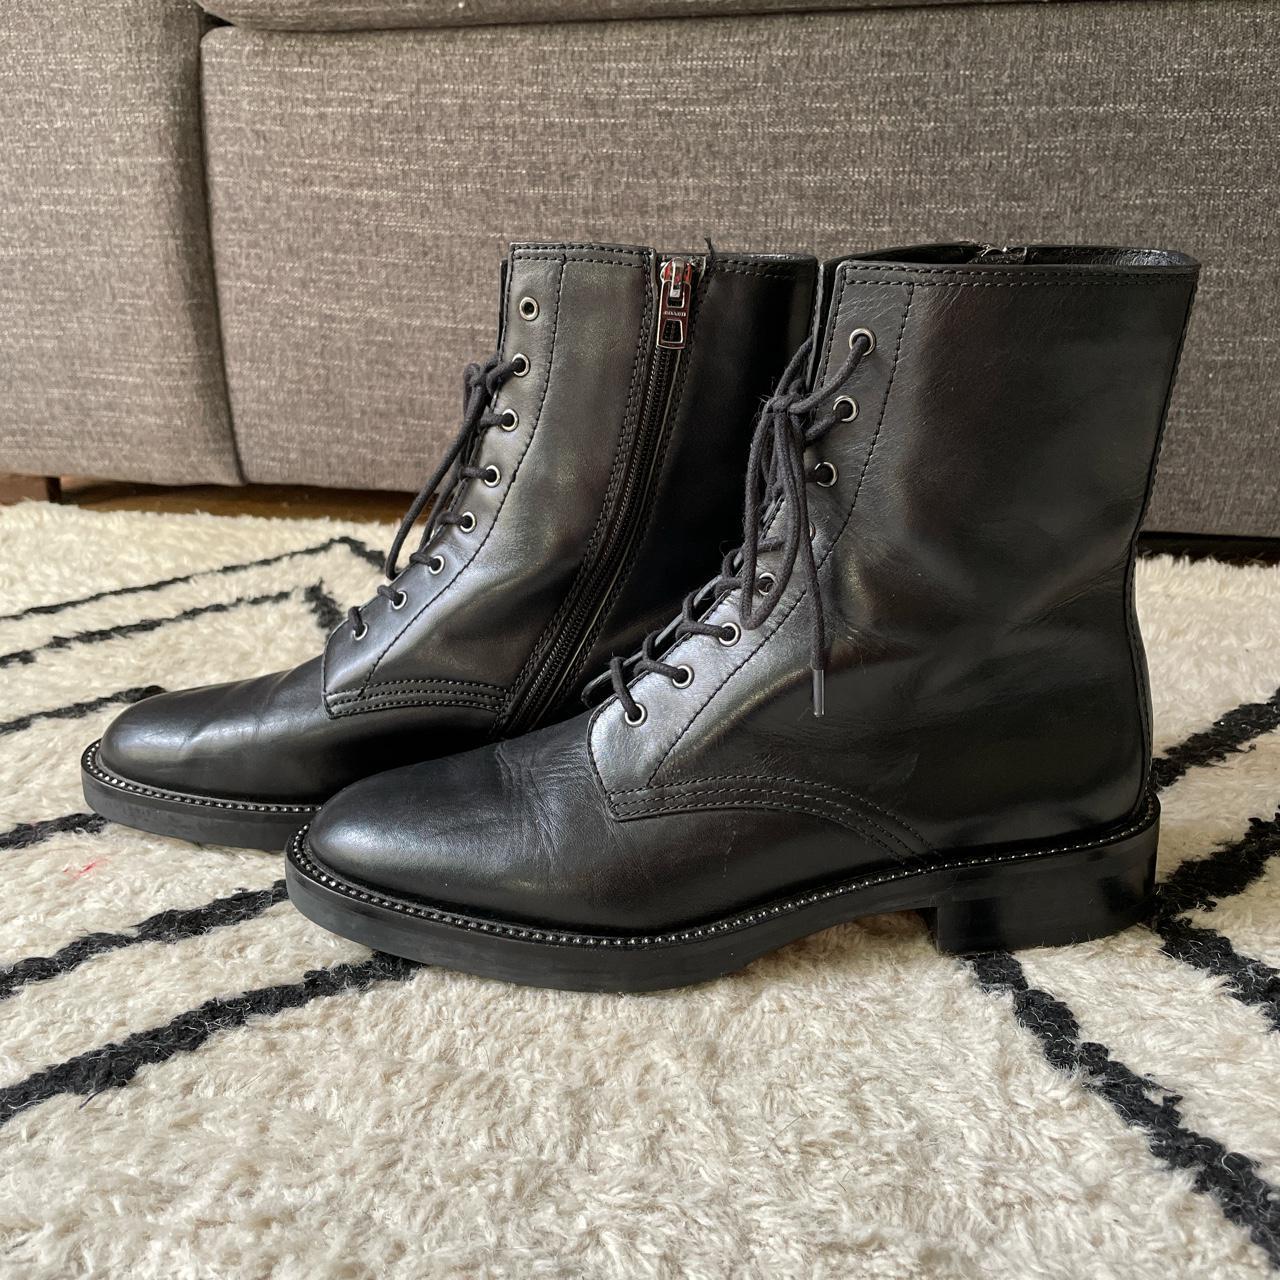 Coach Women's Black and Silver Boots | Depop